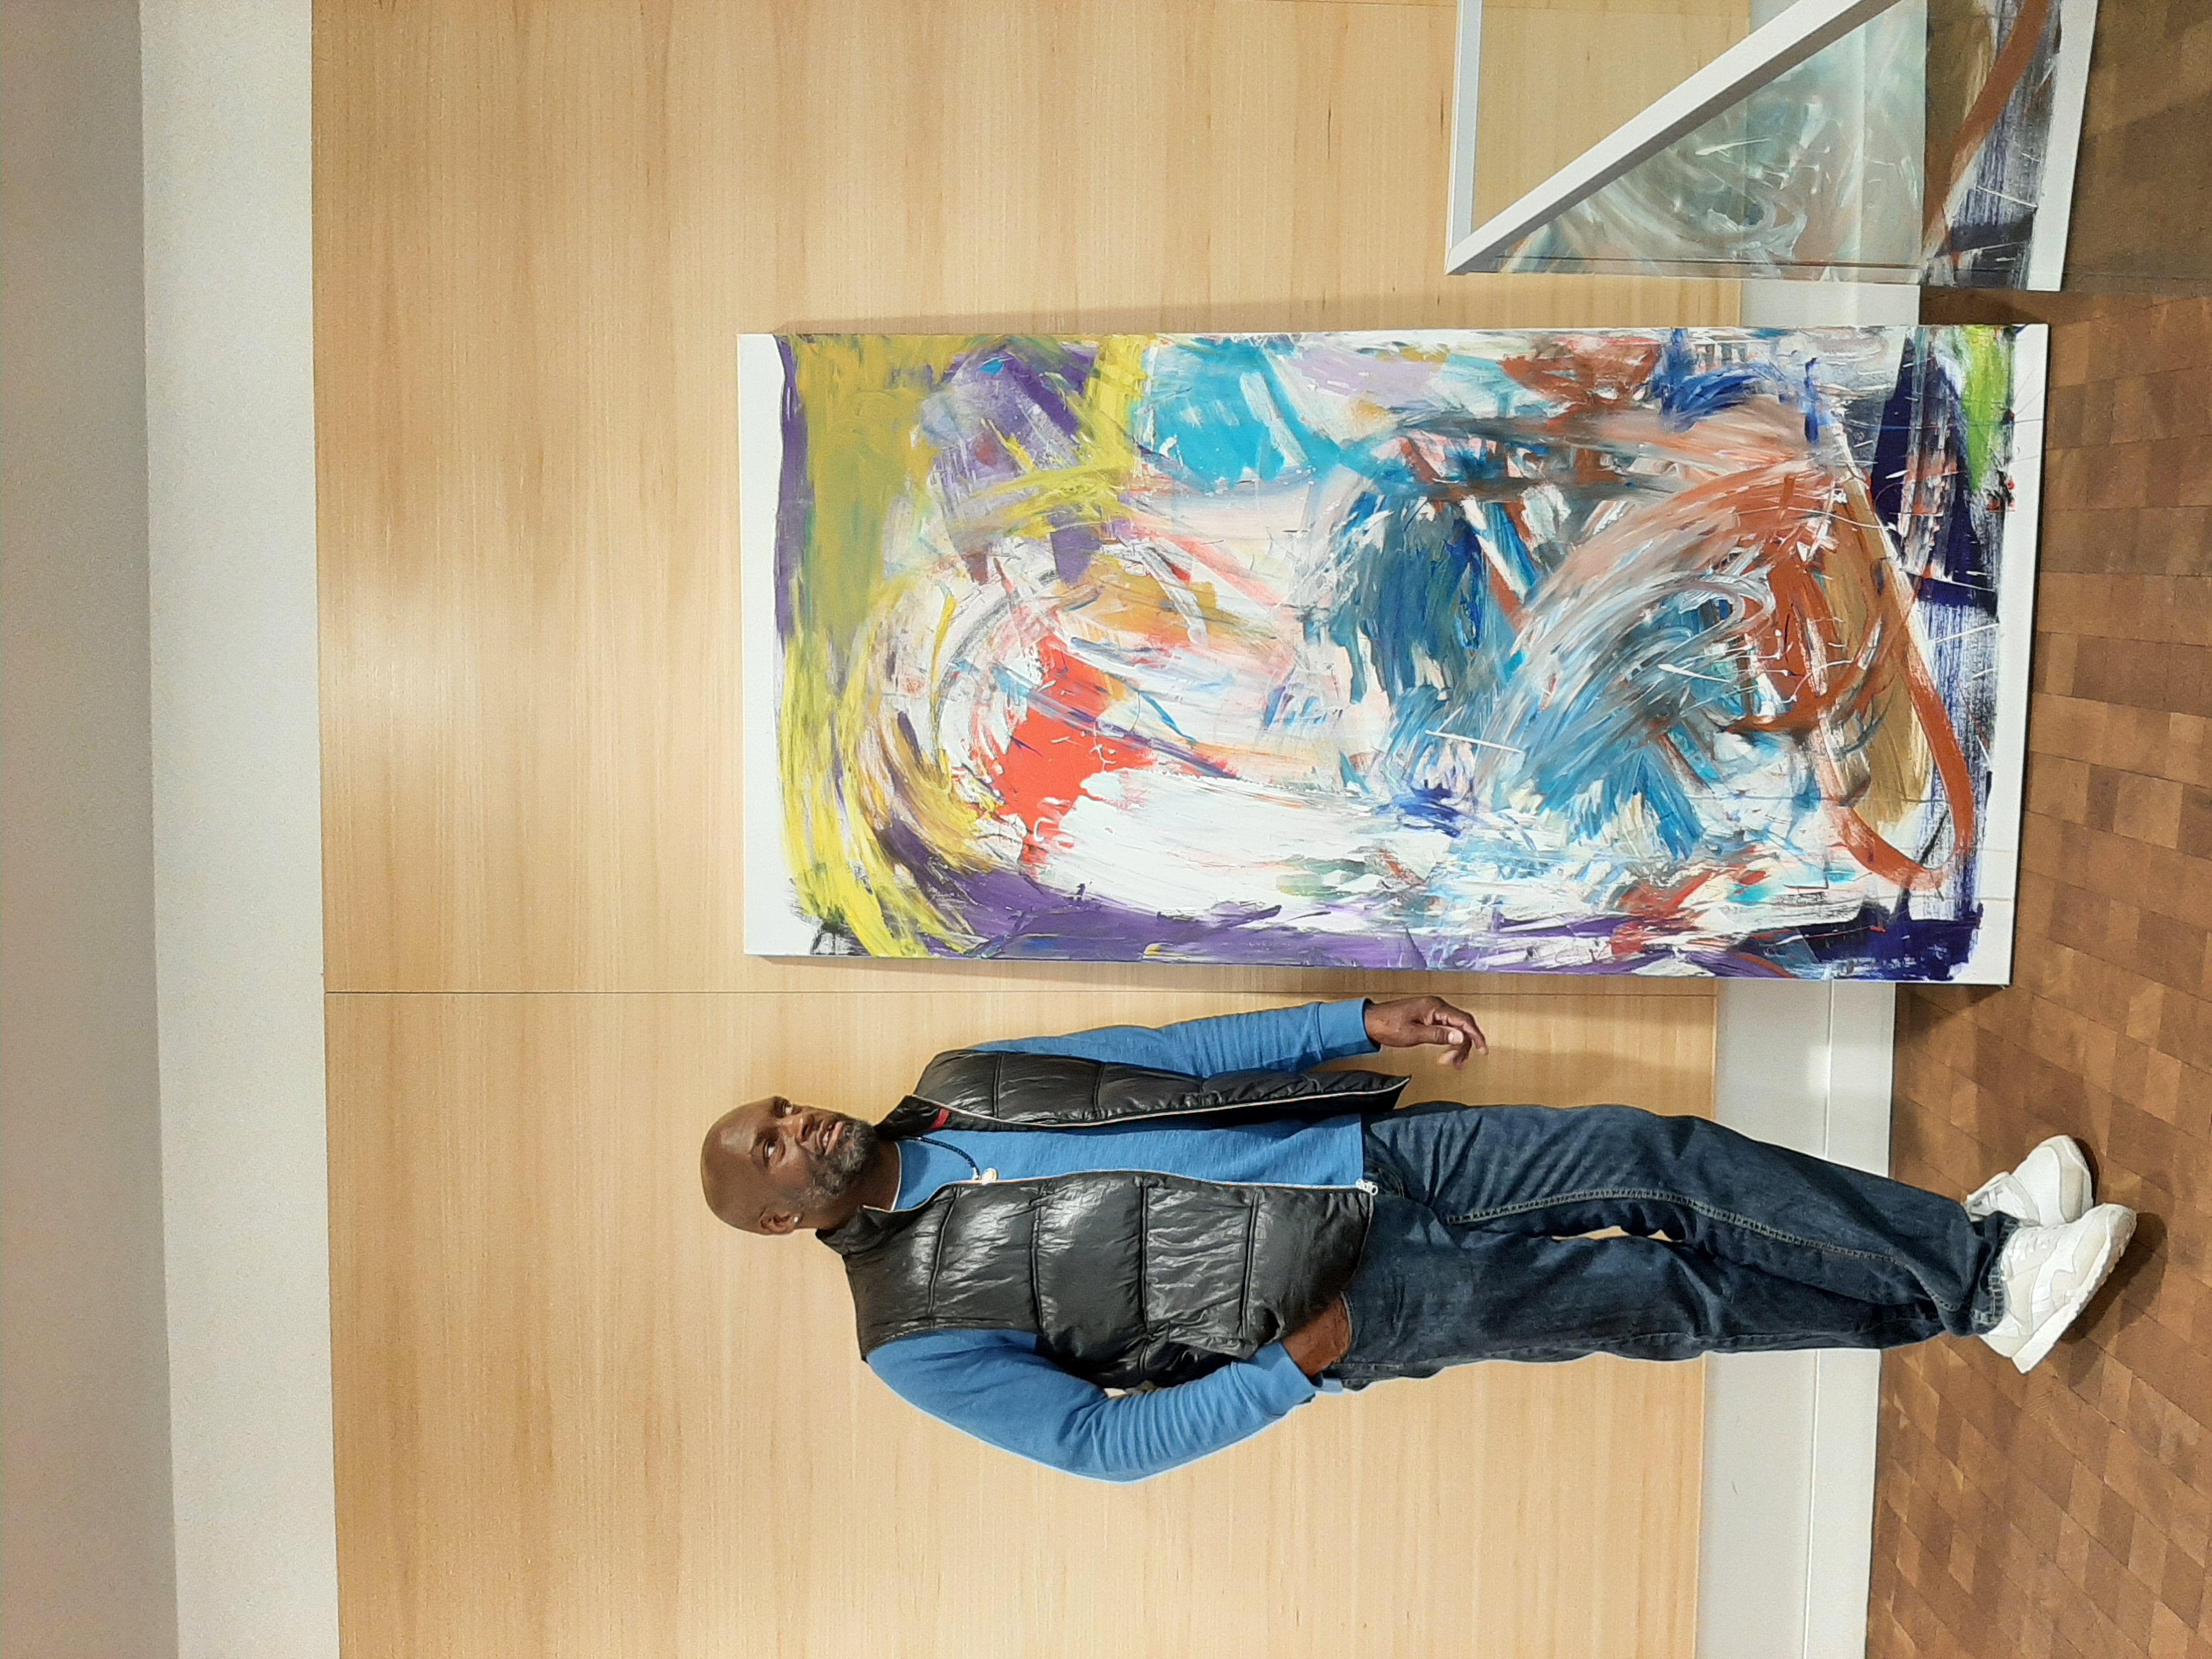 Artist seangarrison with his painting "Tomorrow: Twin Cities"